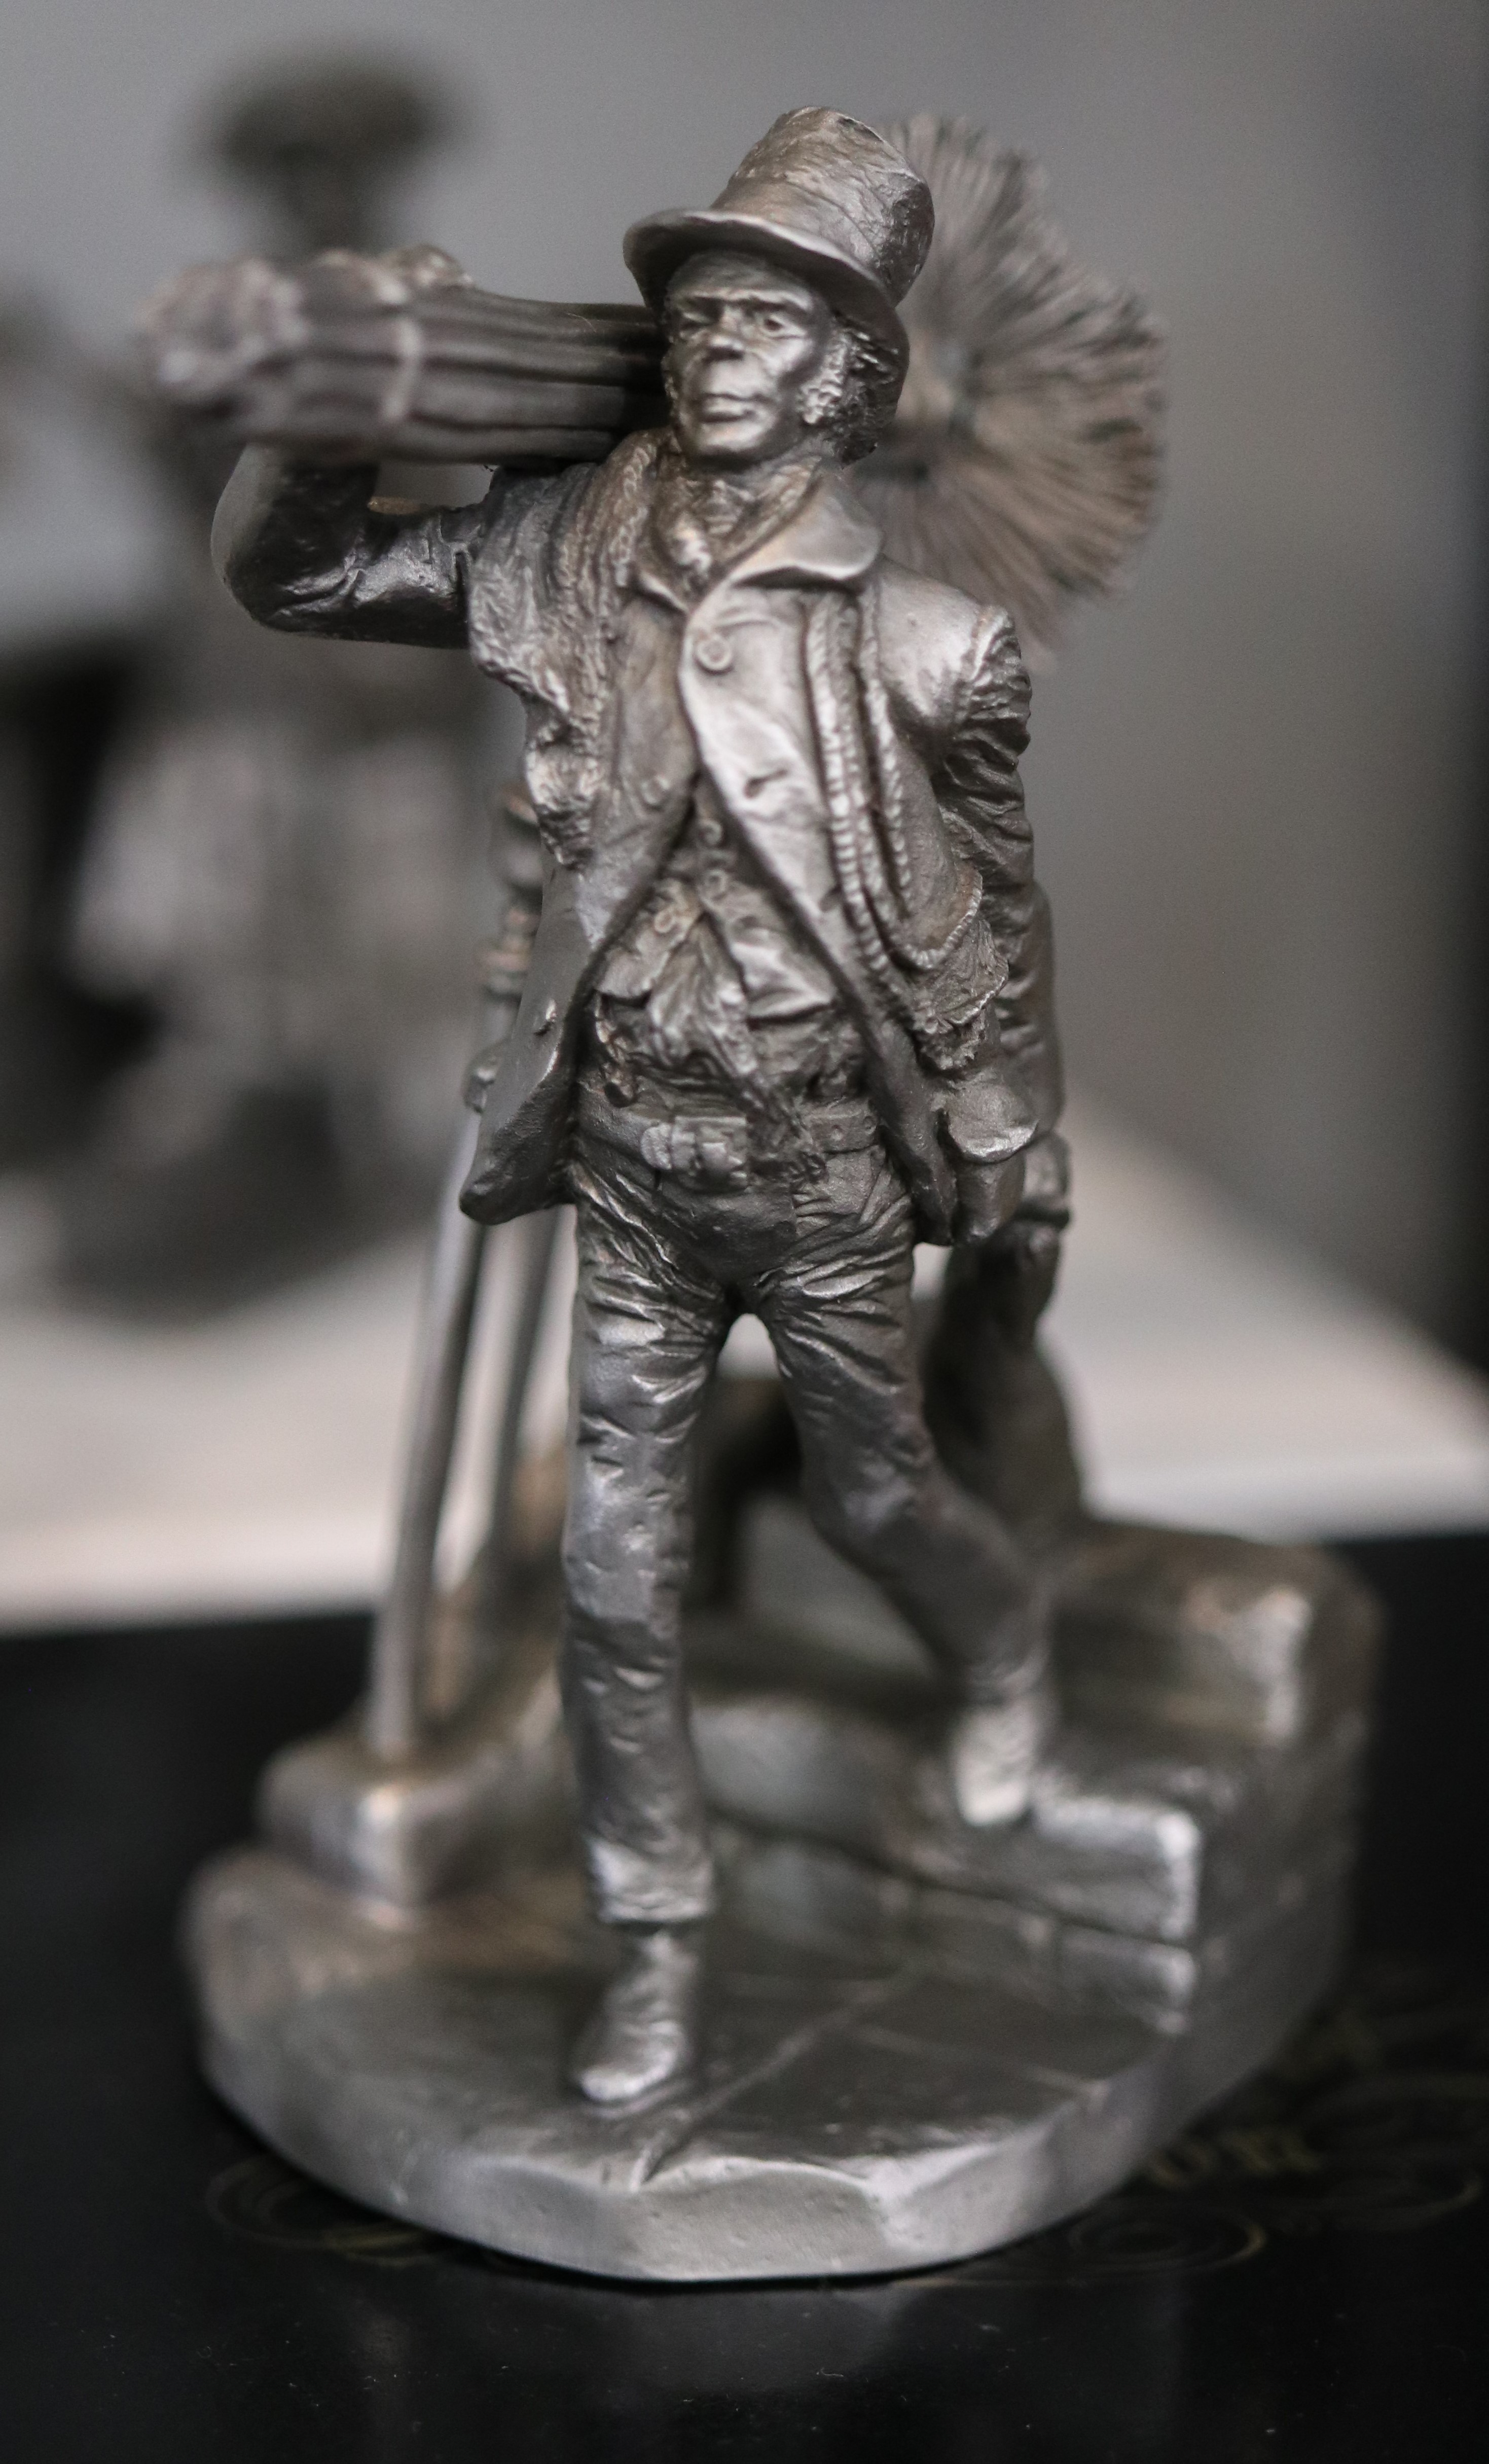 Complete collection of pewter figurines the Cries of London in original boxes - Image 13 of 13